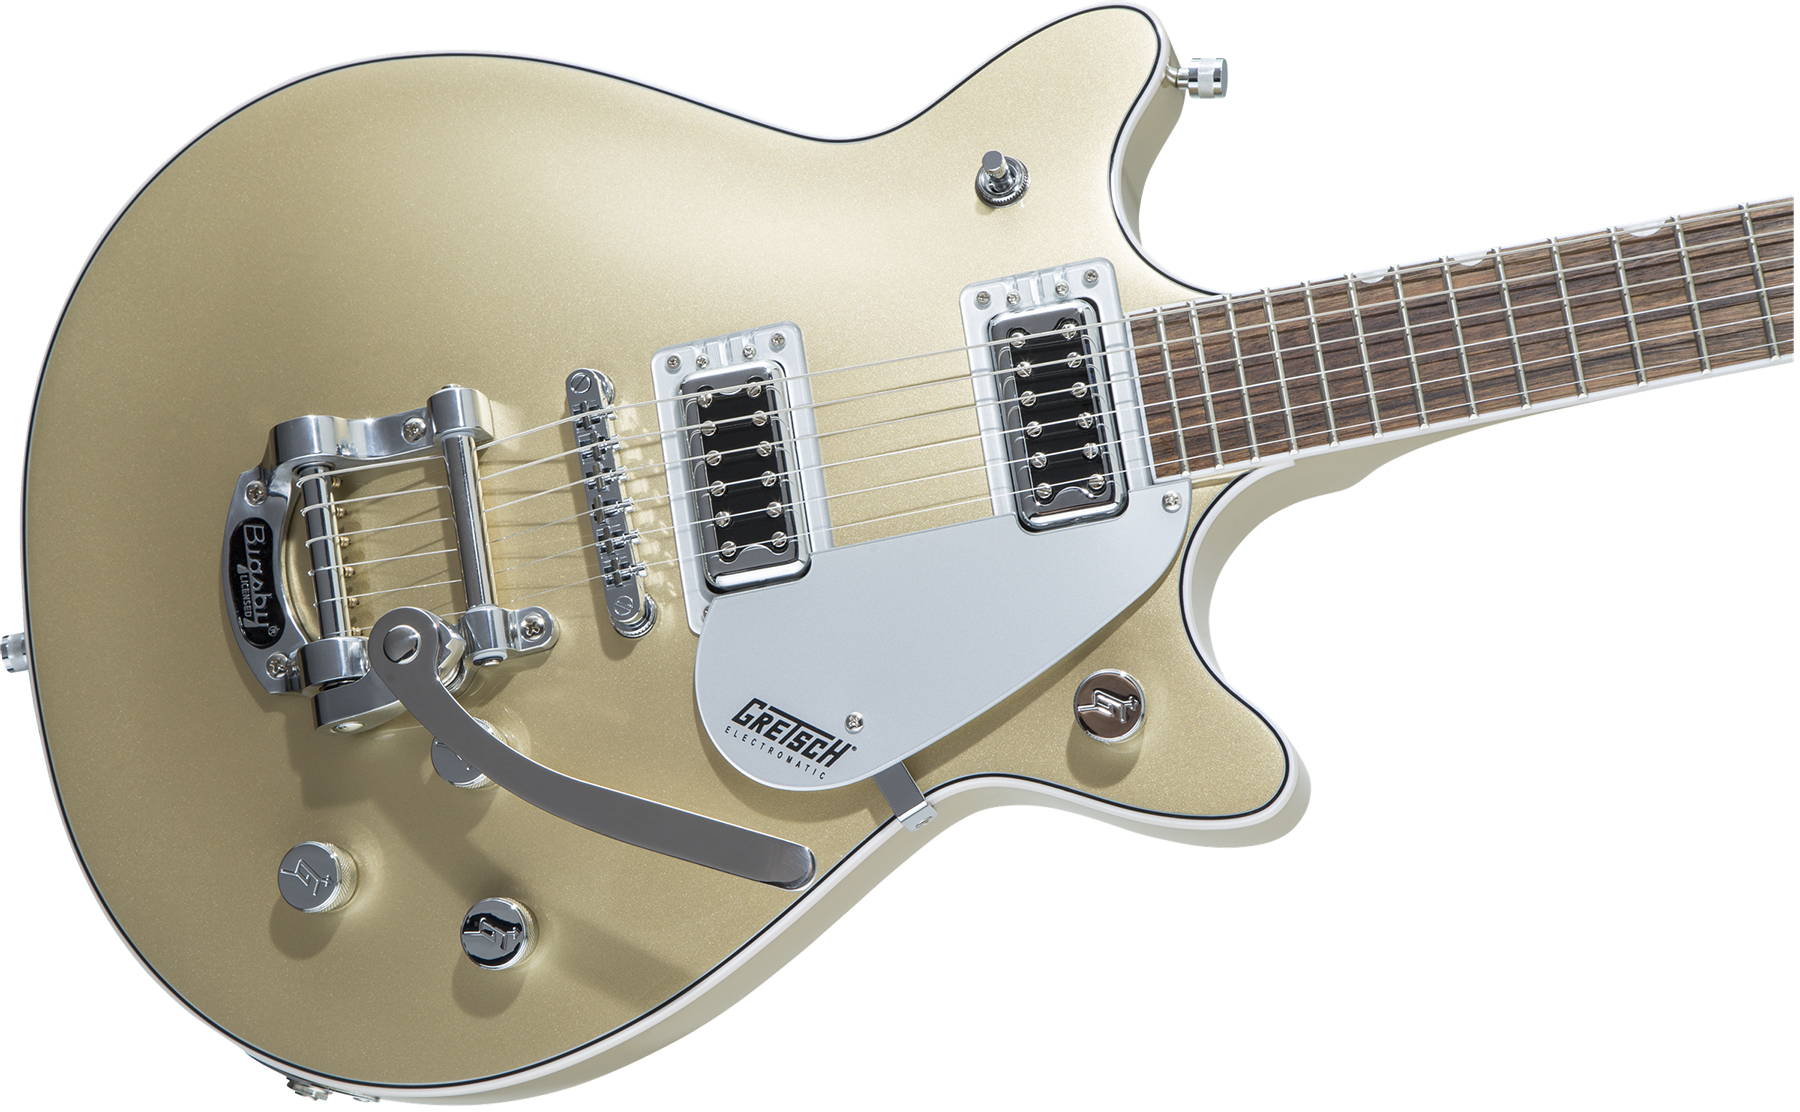 Gretsch G5232t Electromatic Double Jet Ft 2019 Hh Bigsby Lau - Casino Gold - Double Cut E-Gitarre - Variation 2